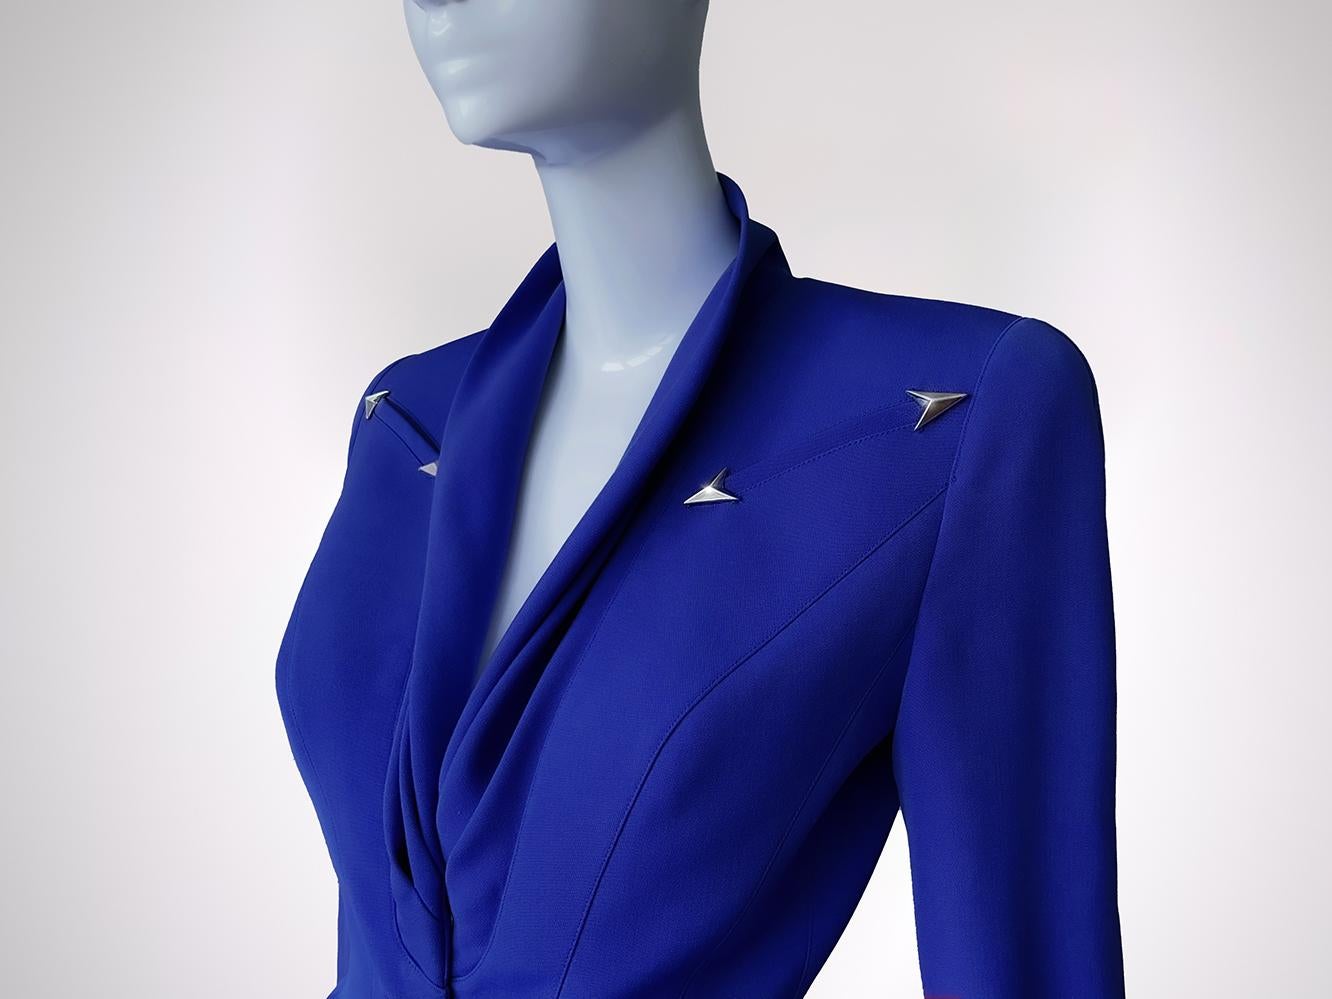 Thierry Mugler Archival FW 1996 Skirt Suit Blue Metal Arrows Jacket Skirt In Good Condition For Sale In Berlin, BE